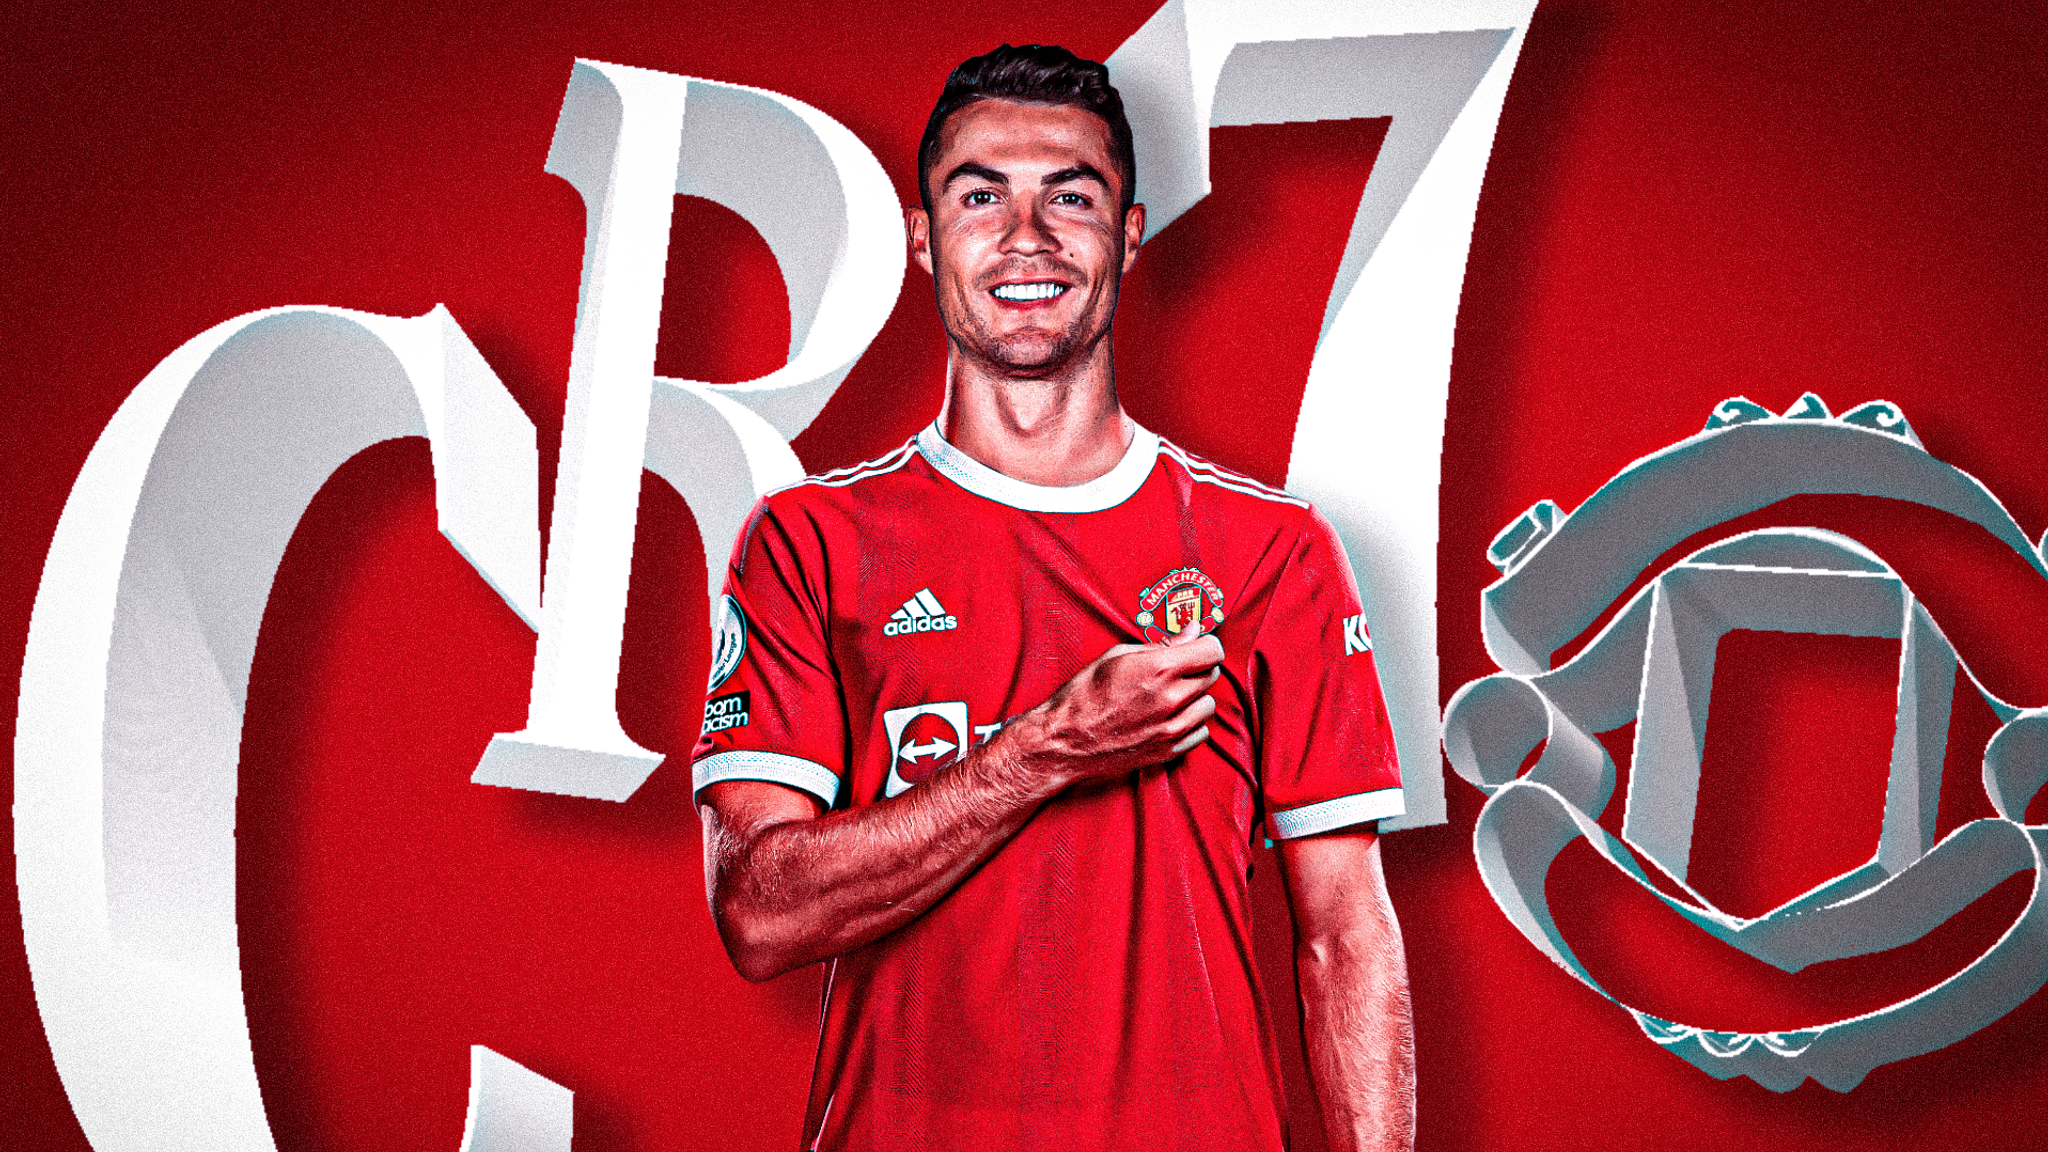 Cristiano Ronaldo returns to Man Utd: Will he be a success with Ole Gunnar Solskjaer's side?